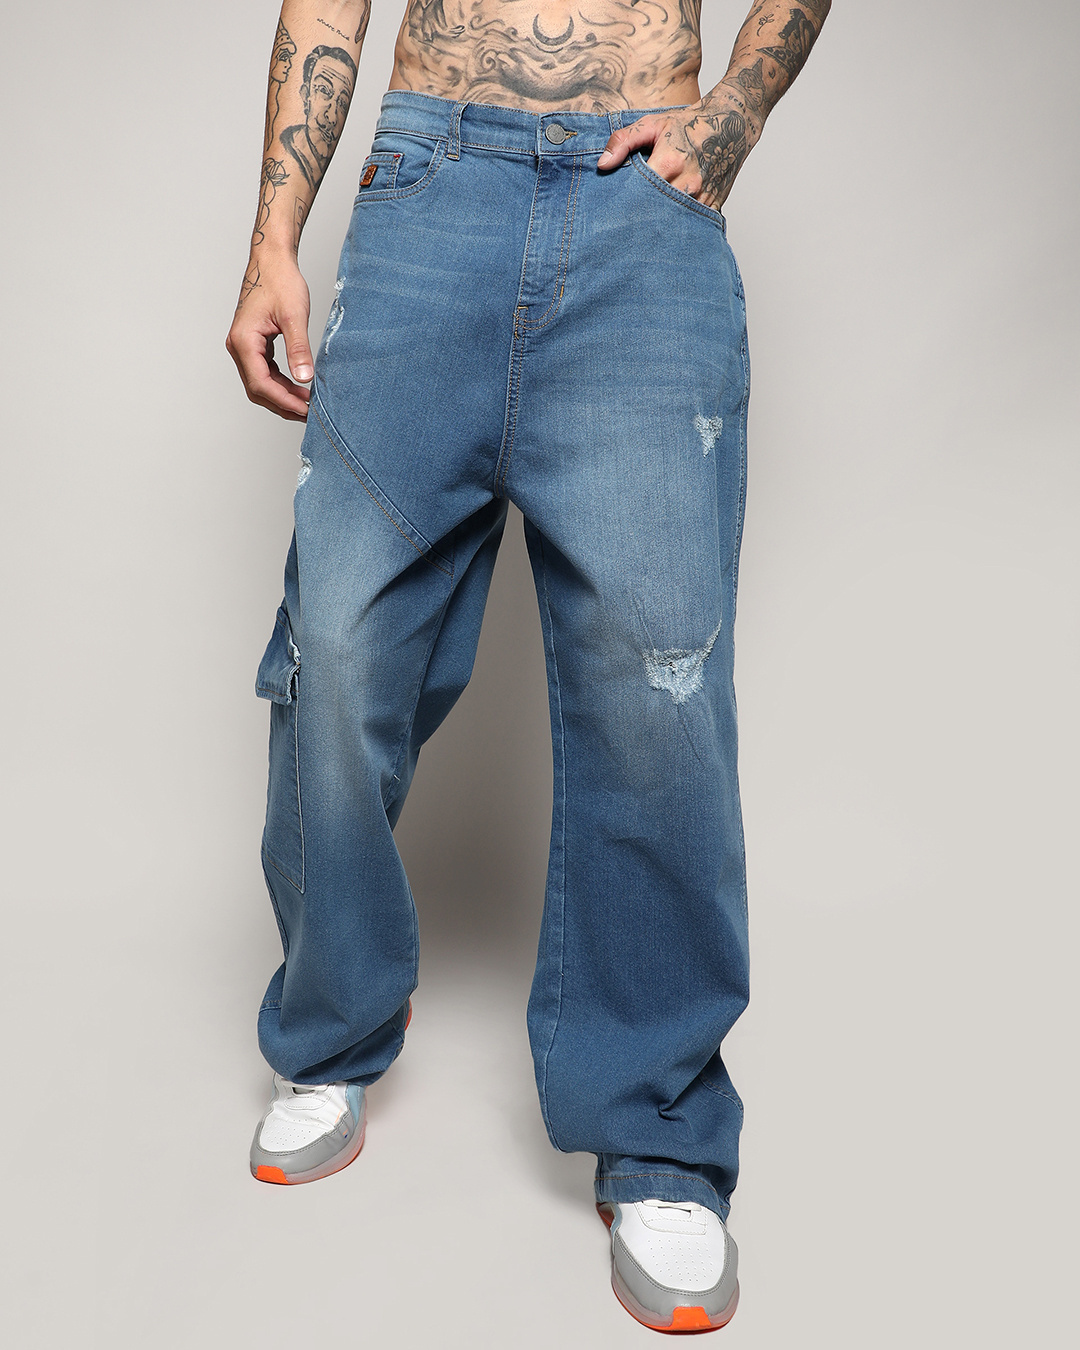 Buy Men's Blue Washed Distressed Oversized Cargo Jeans Online at Bewakoof